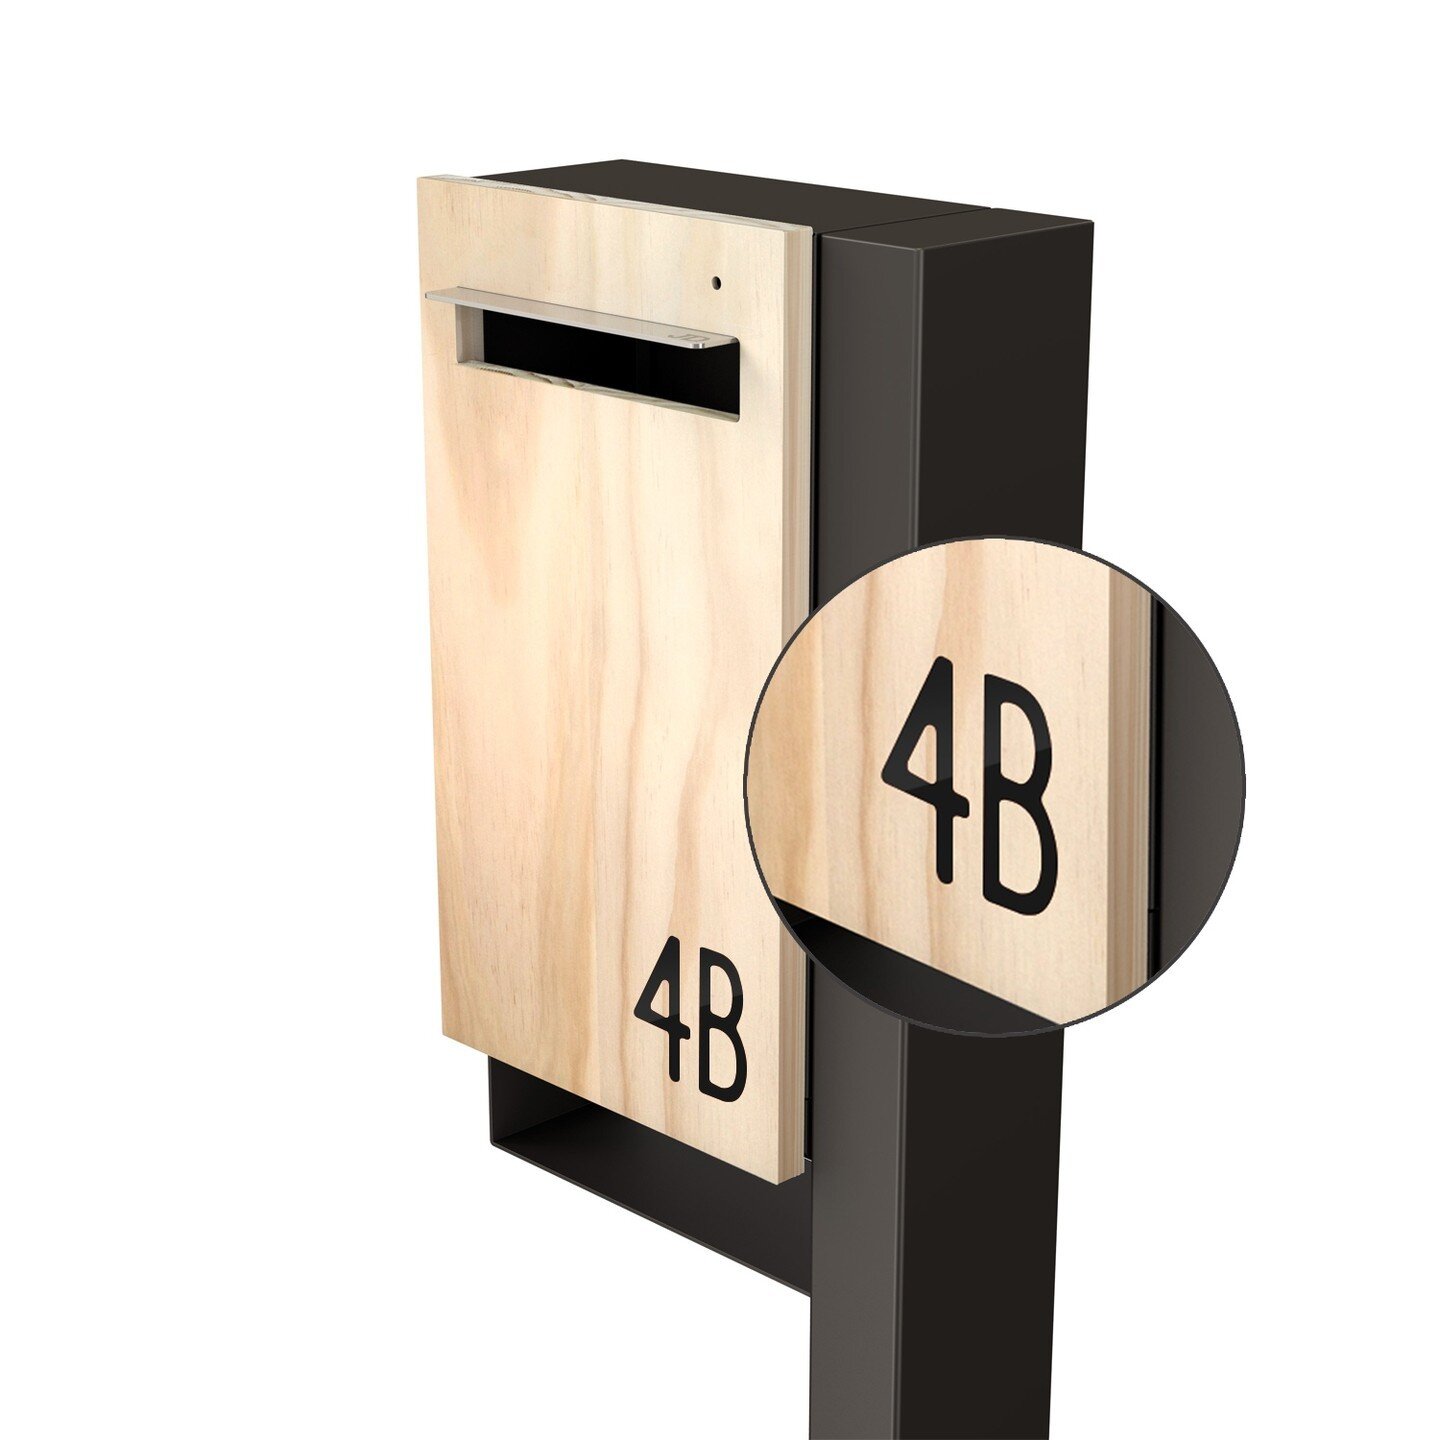 Javi post mount letterbox 📫 in charcoal, clear timber front and flush street numbers.⁠⠀⁠
.⁠⠀⁠
.⁠⠀⁠
Australian 🇦🇺 made and designed.⁠⠀⁠
.⁠⠀⁠
.⁠⠀⁠
#javidesign #mailbox #mailboxes #home #newhome #homeimprovement #handmademovement #creatorslane #madet